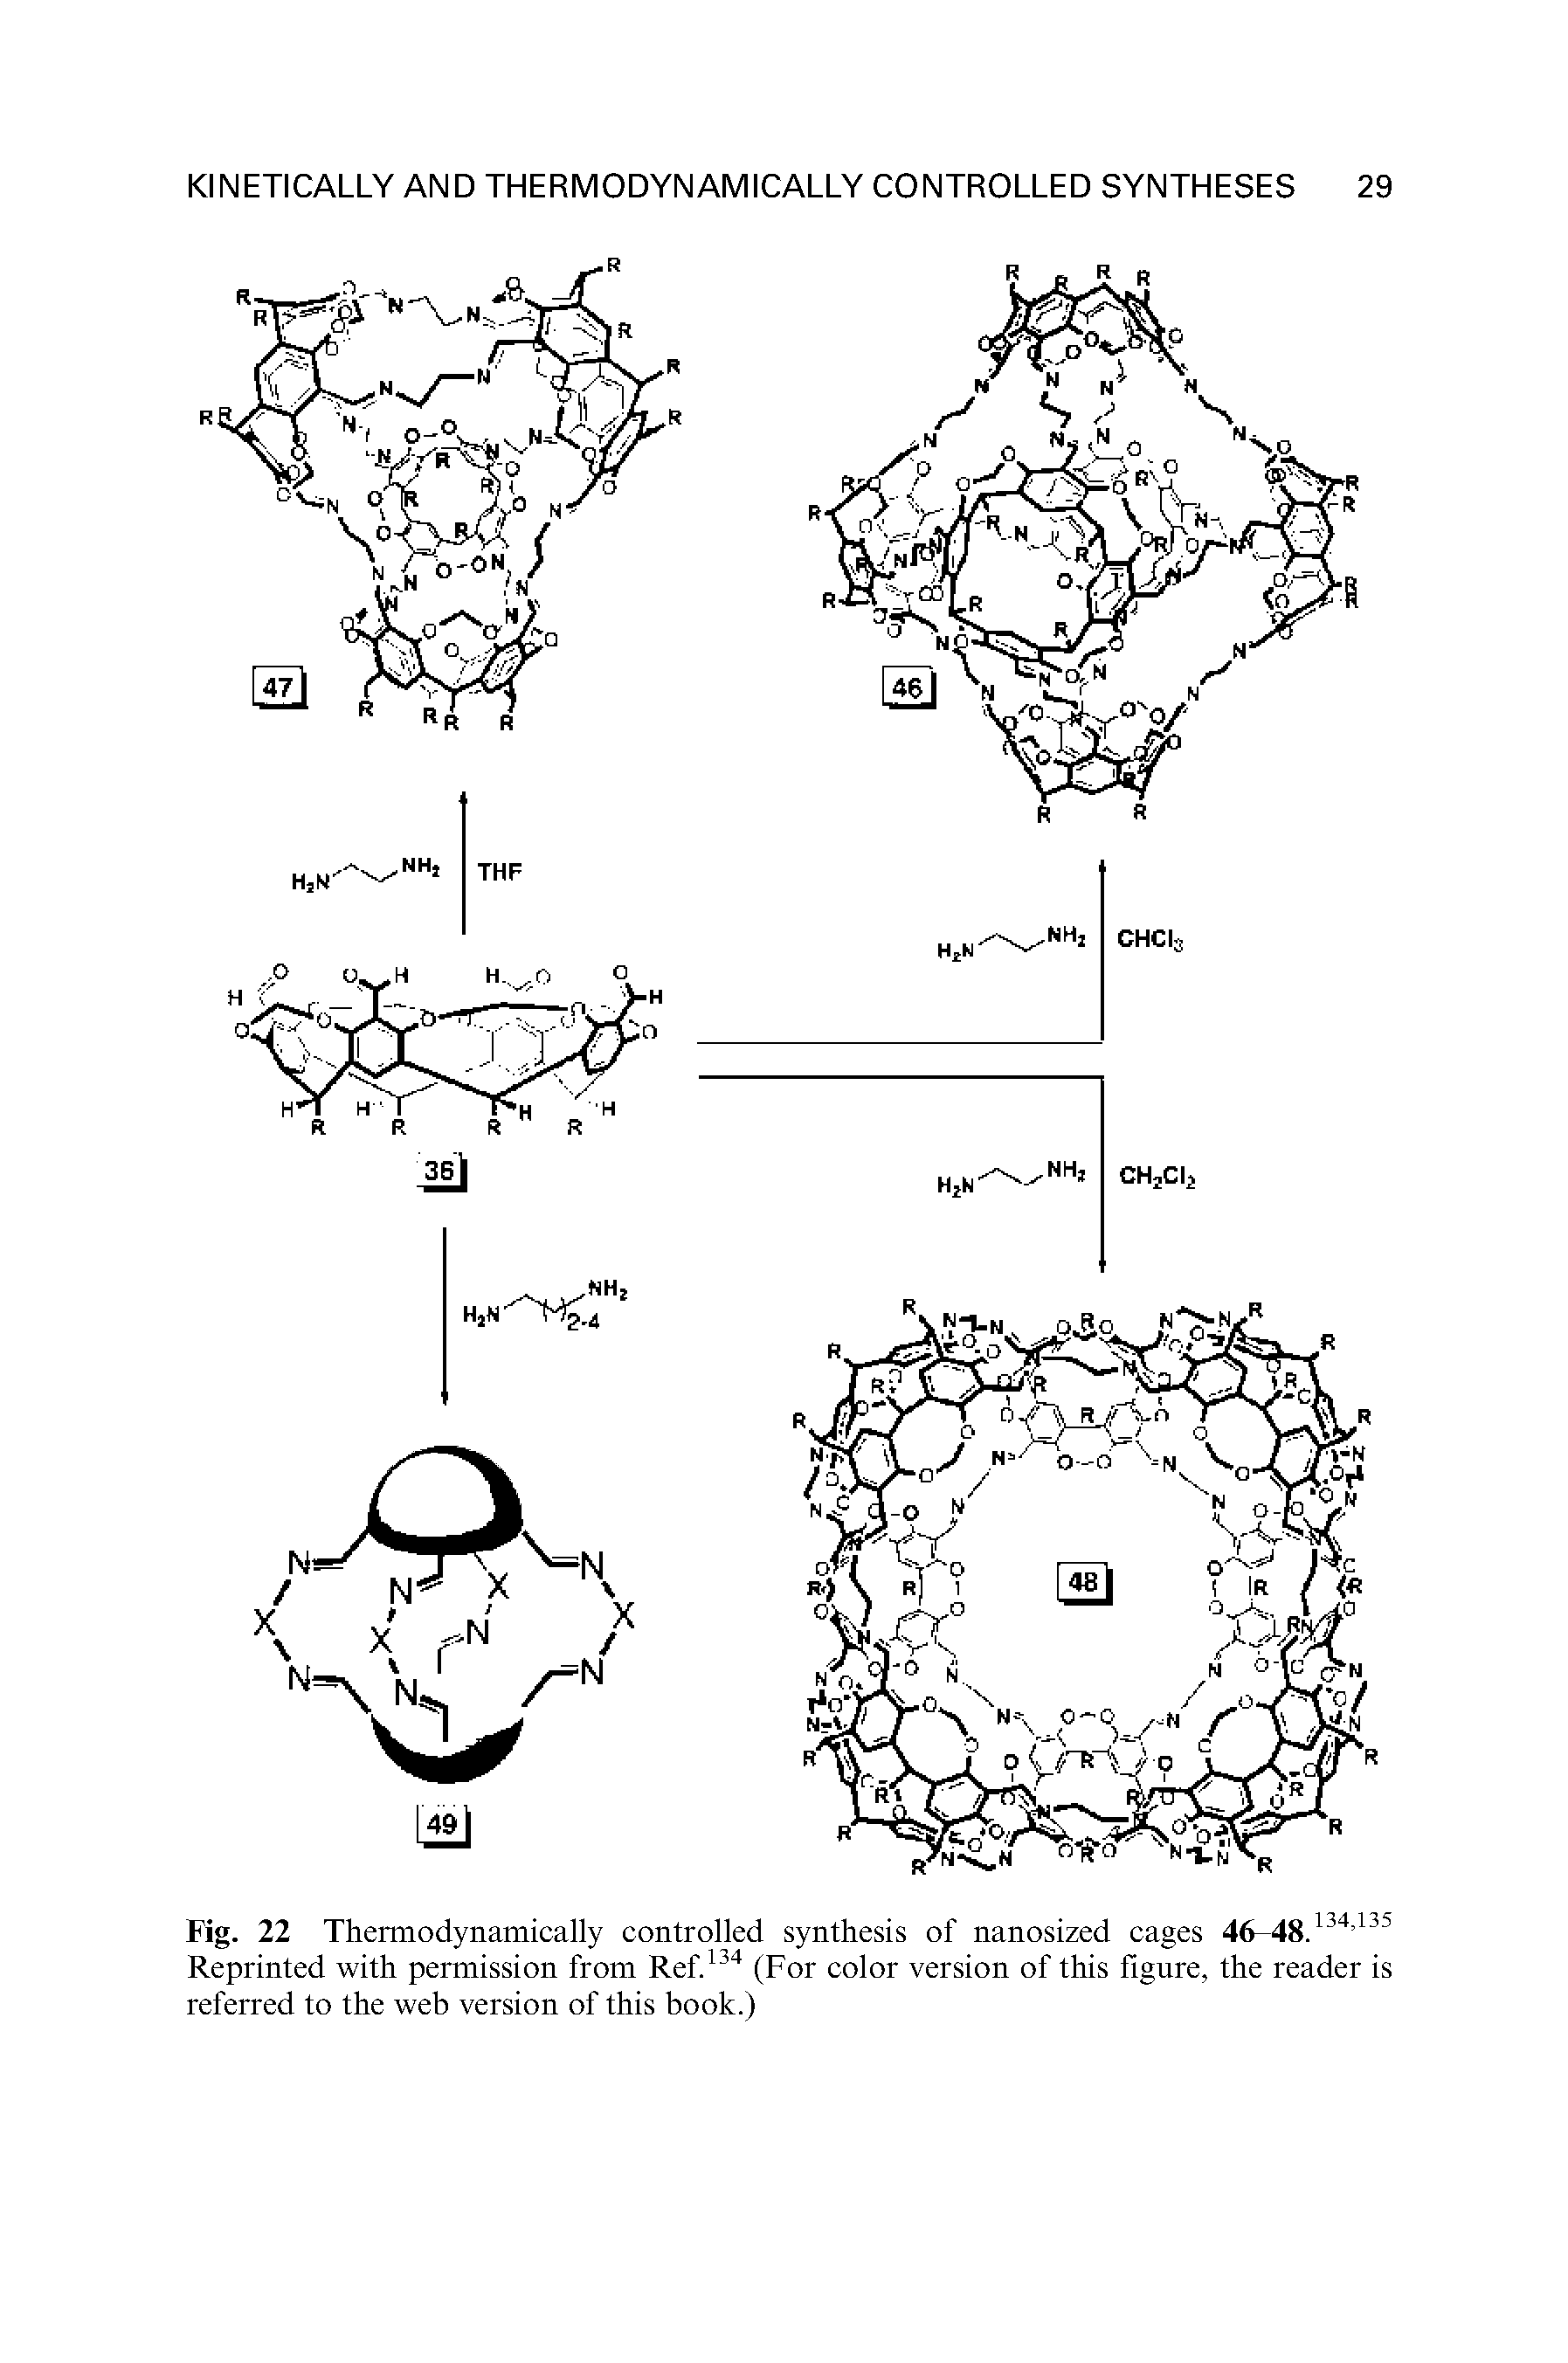 Fig. 22 Thermodynamically controlled synthesis of nanosized cages 46-48.134,135 Reprinted with permission from Ref.134 (For color version of this figure, the reader is referred to the web version of this book.)...